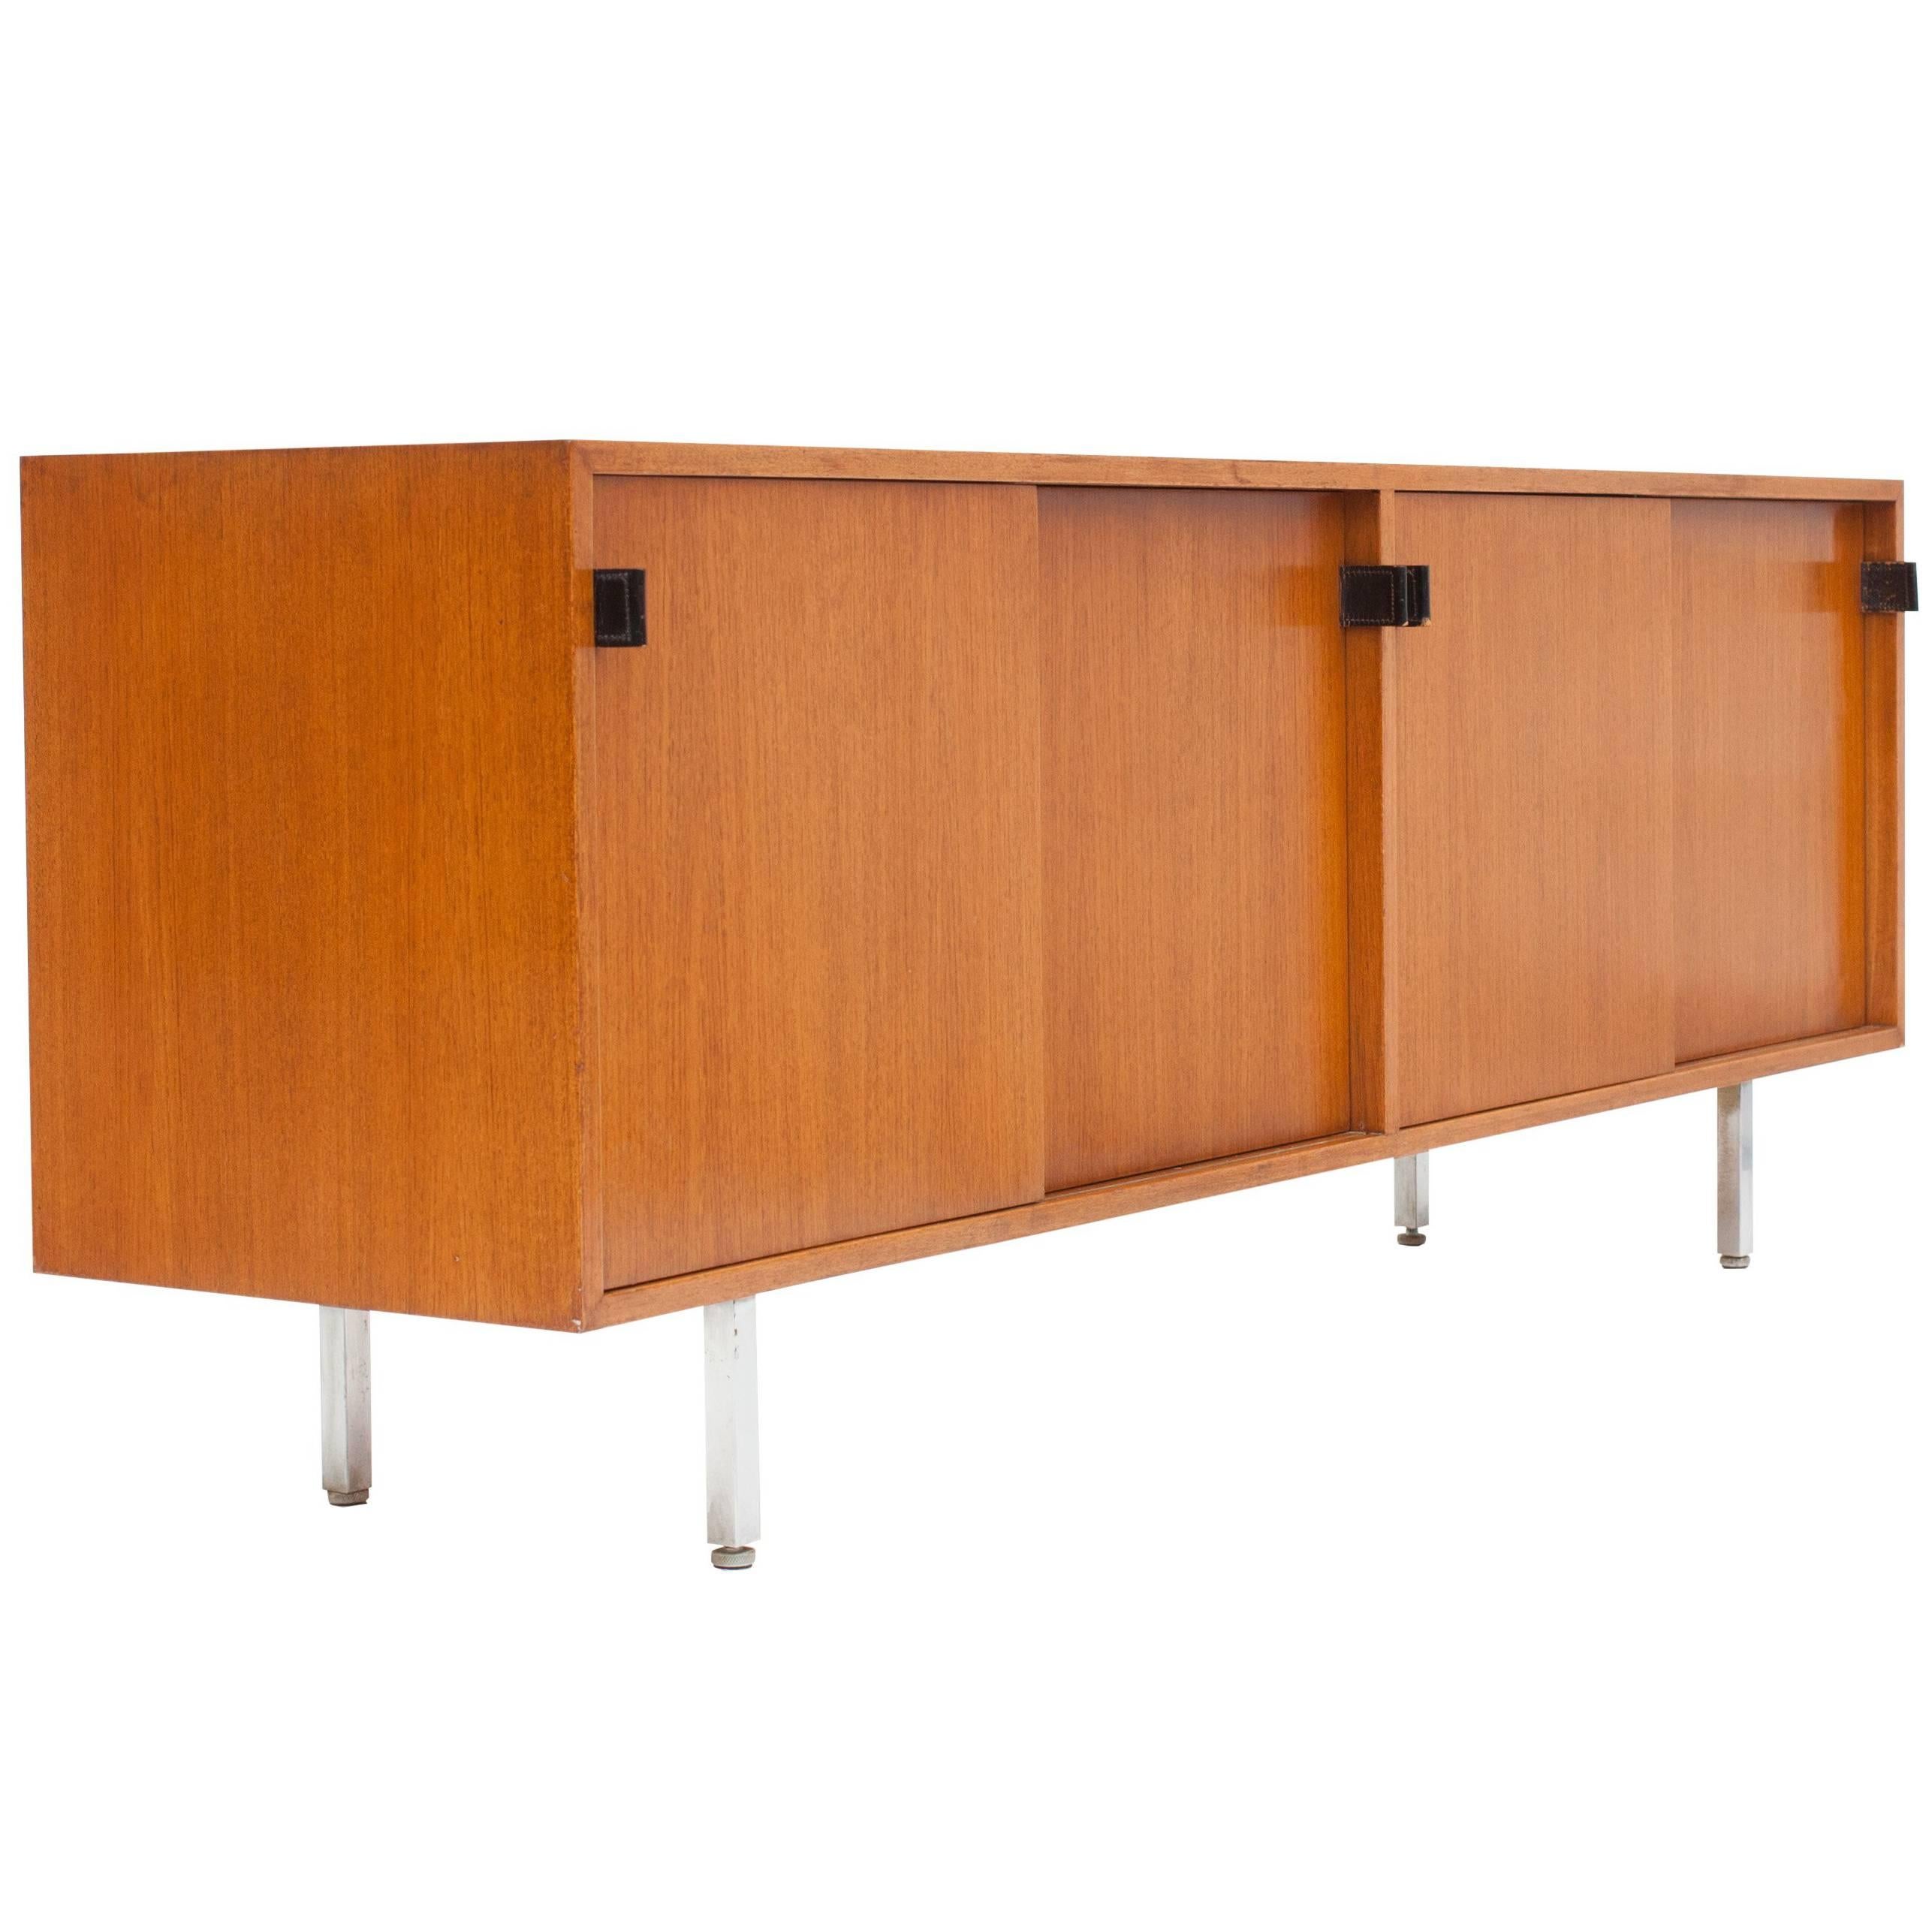 Modern Credenza in Teak by Florence Knoll, Manufactured by De Coene, 1950s